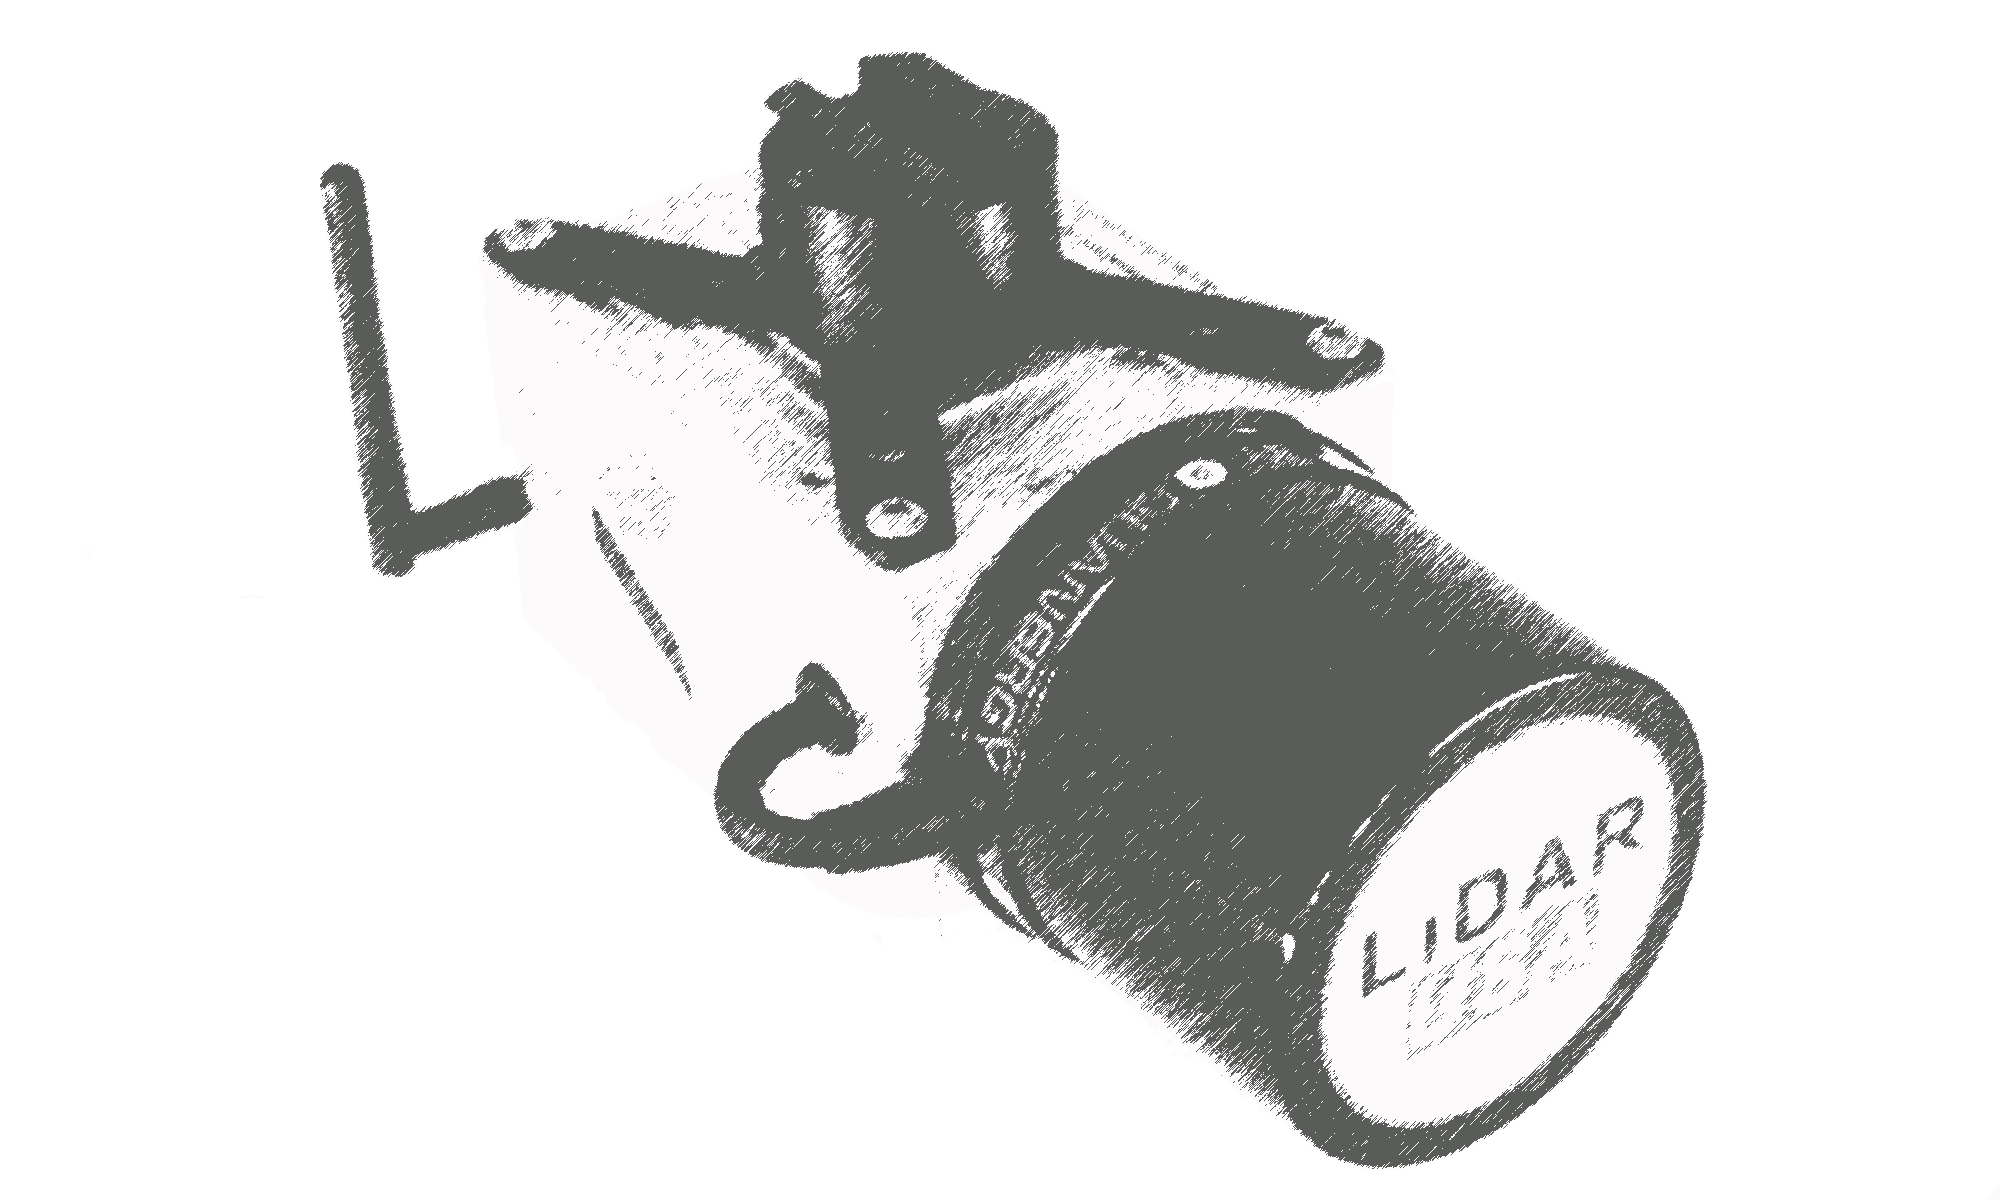 Lidar scanning by Spatial Collect